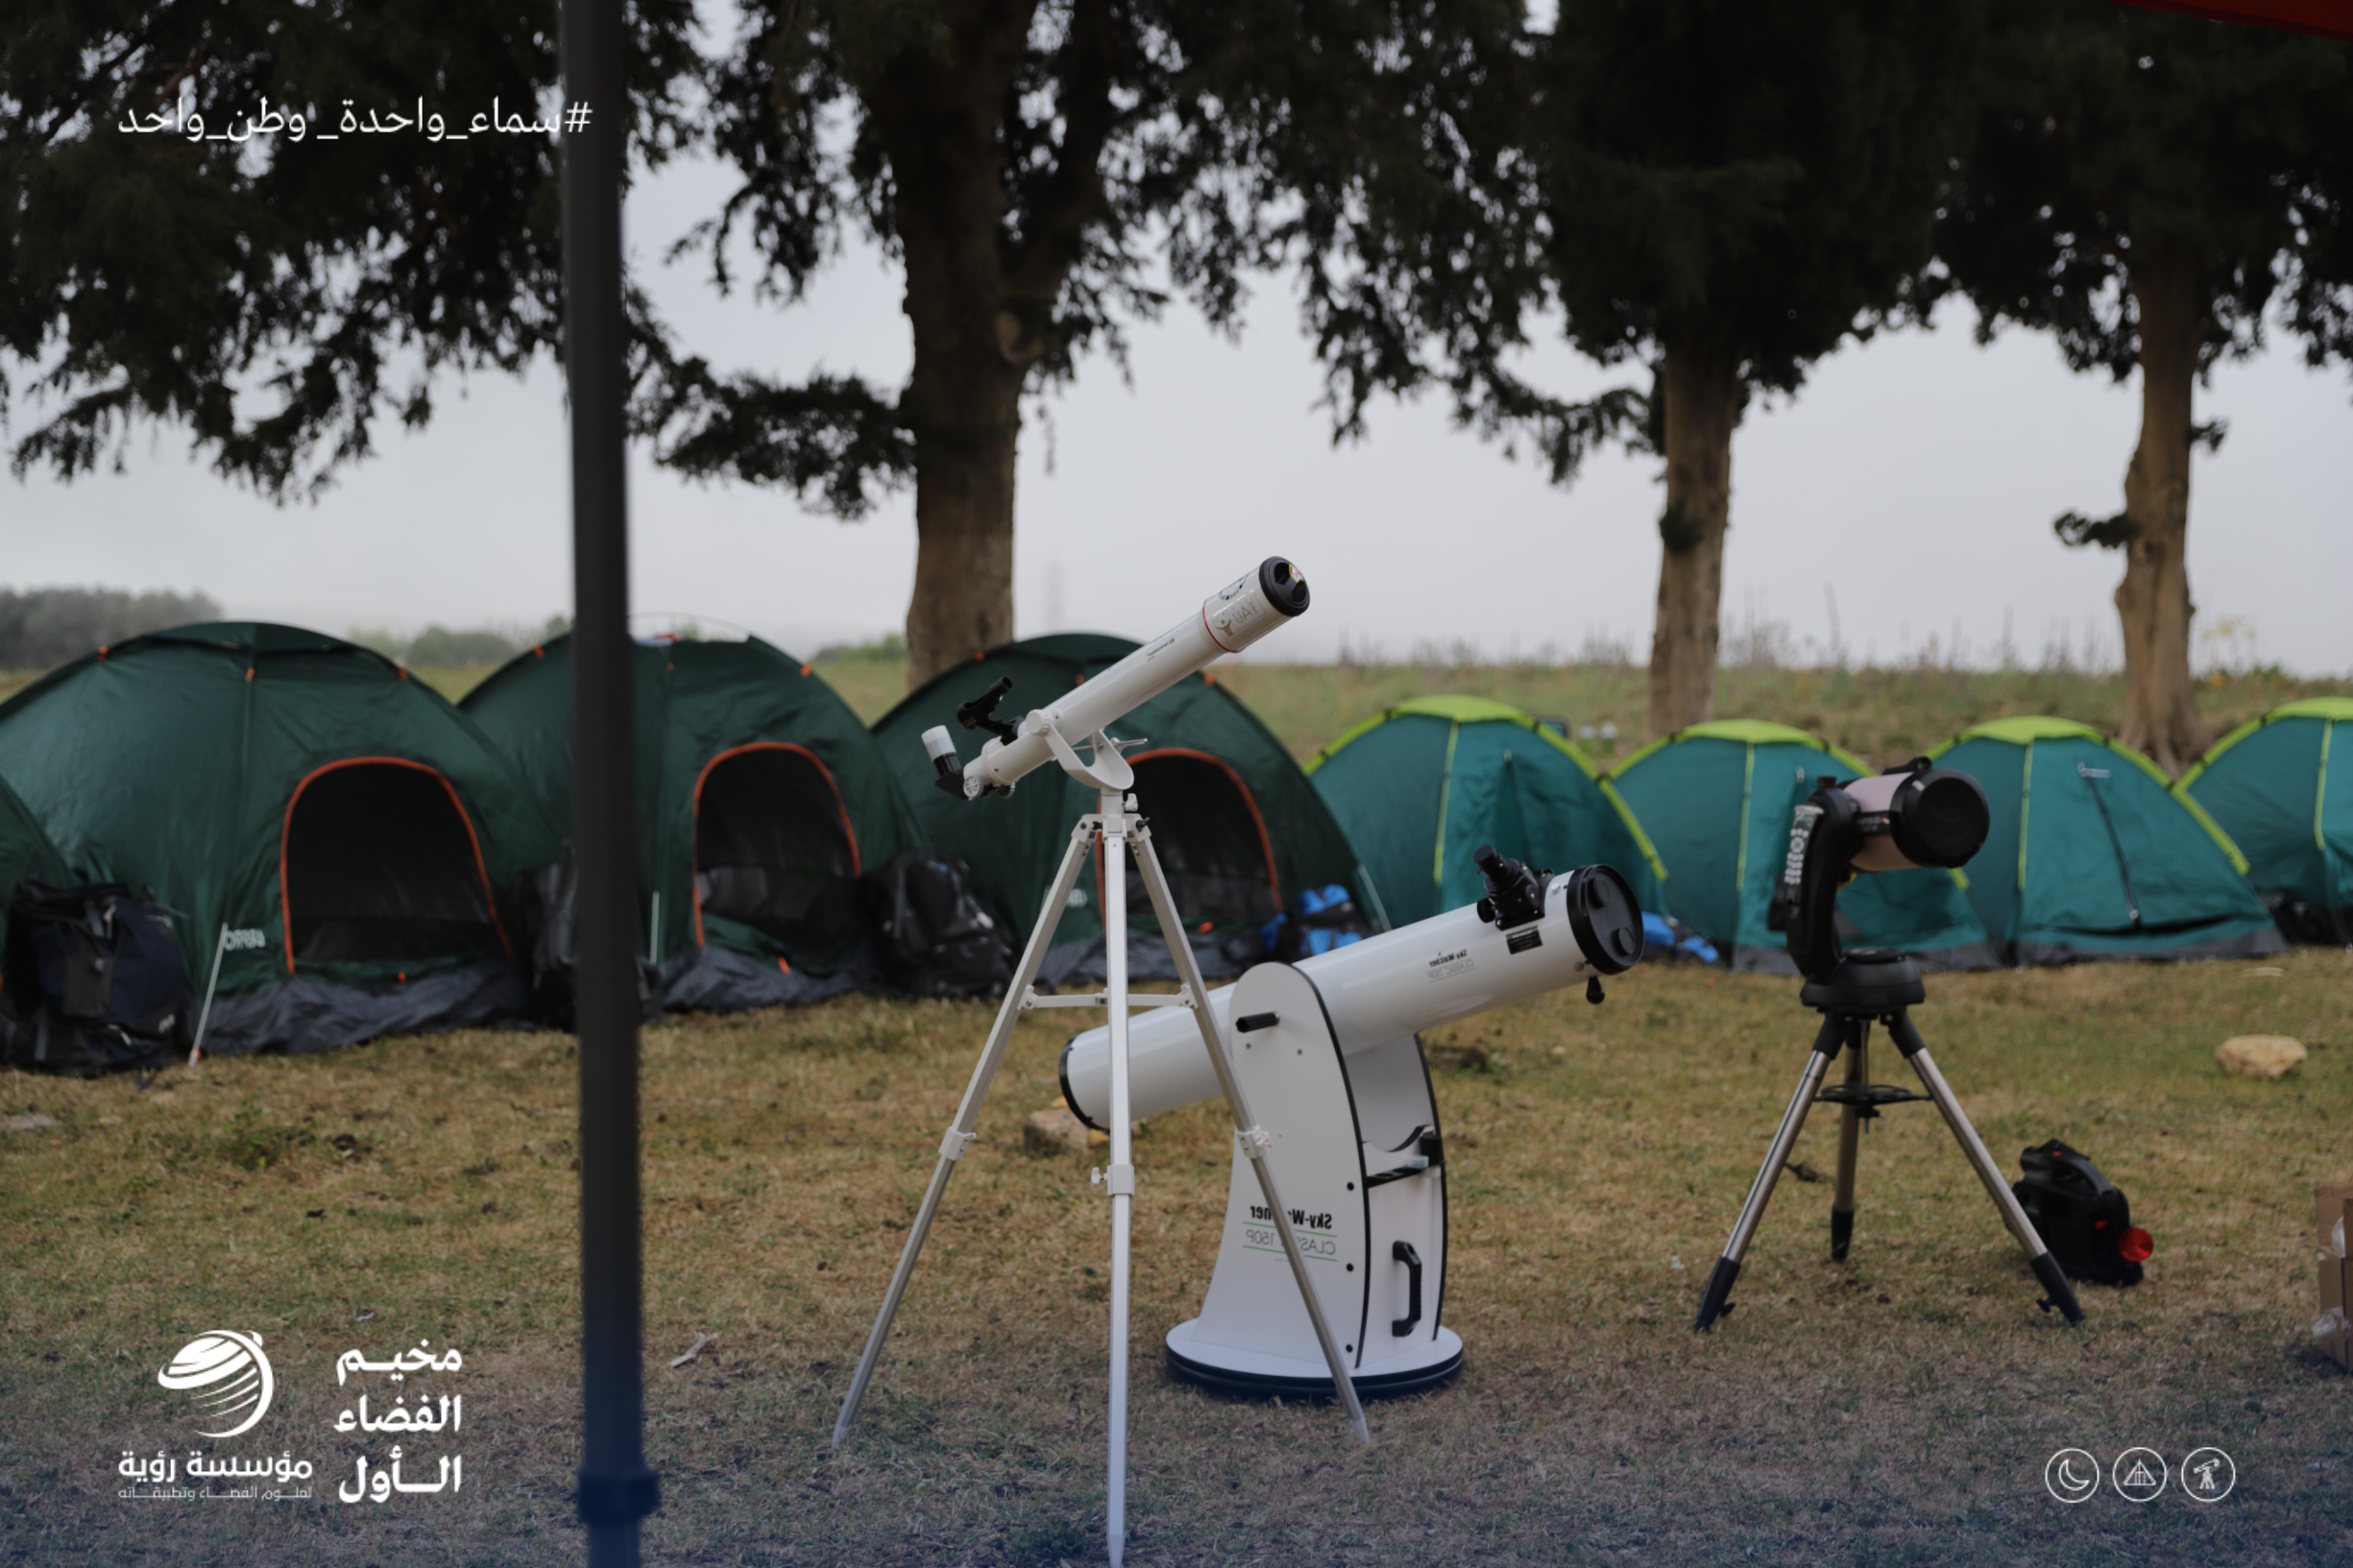 Three telescopes are lined up on a grassy field in front of a row of small tents at a space camp for students.